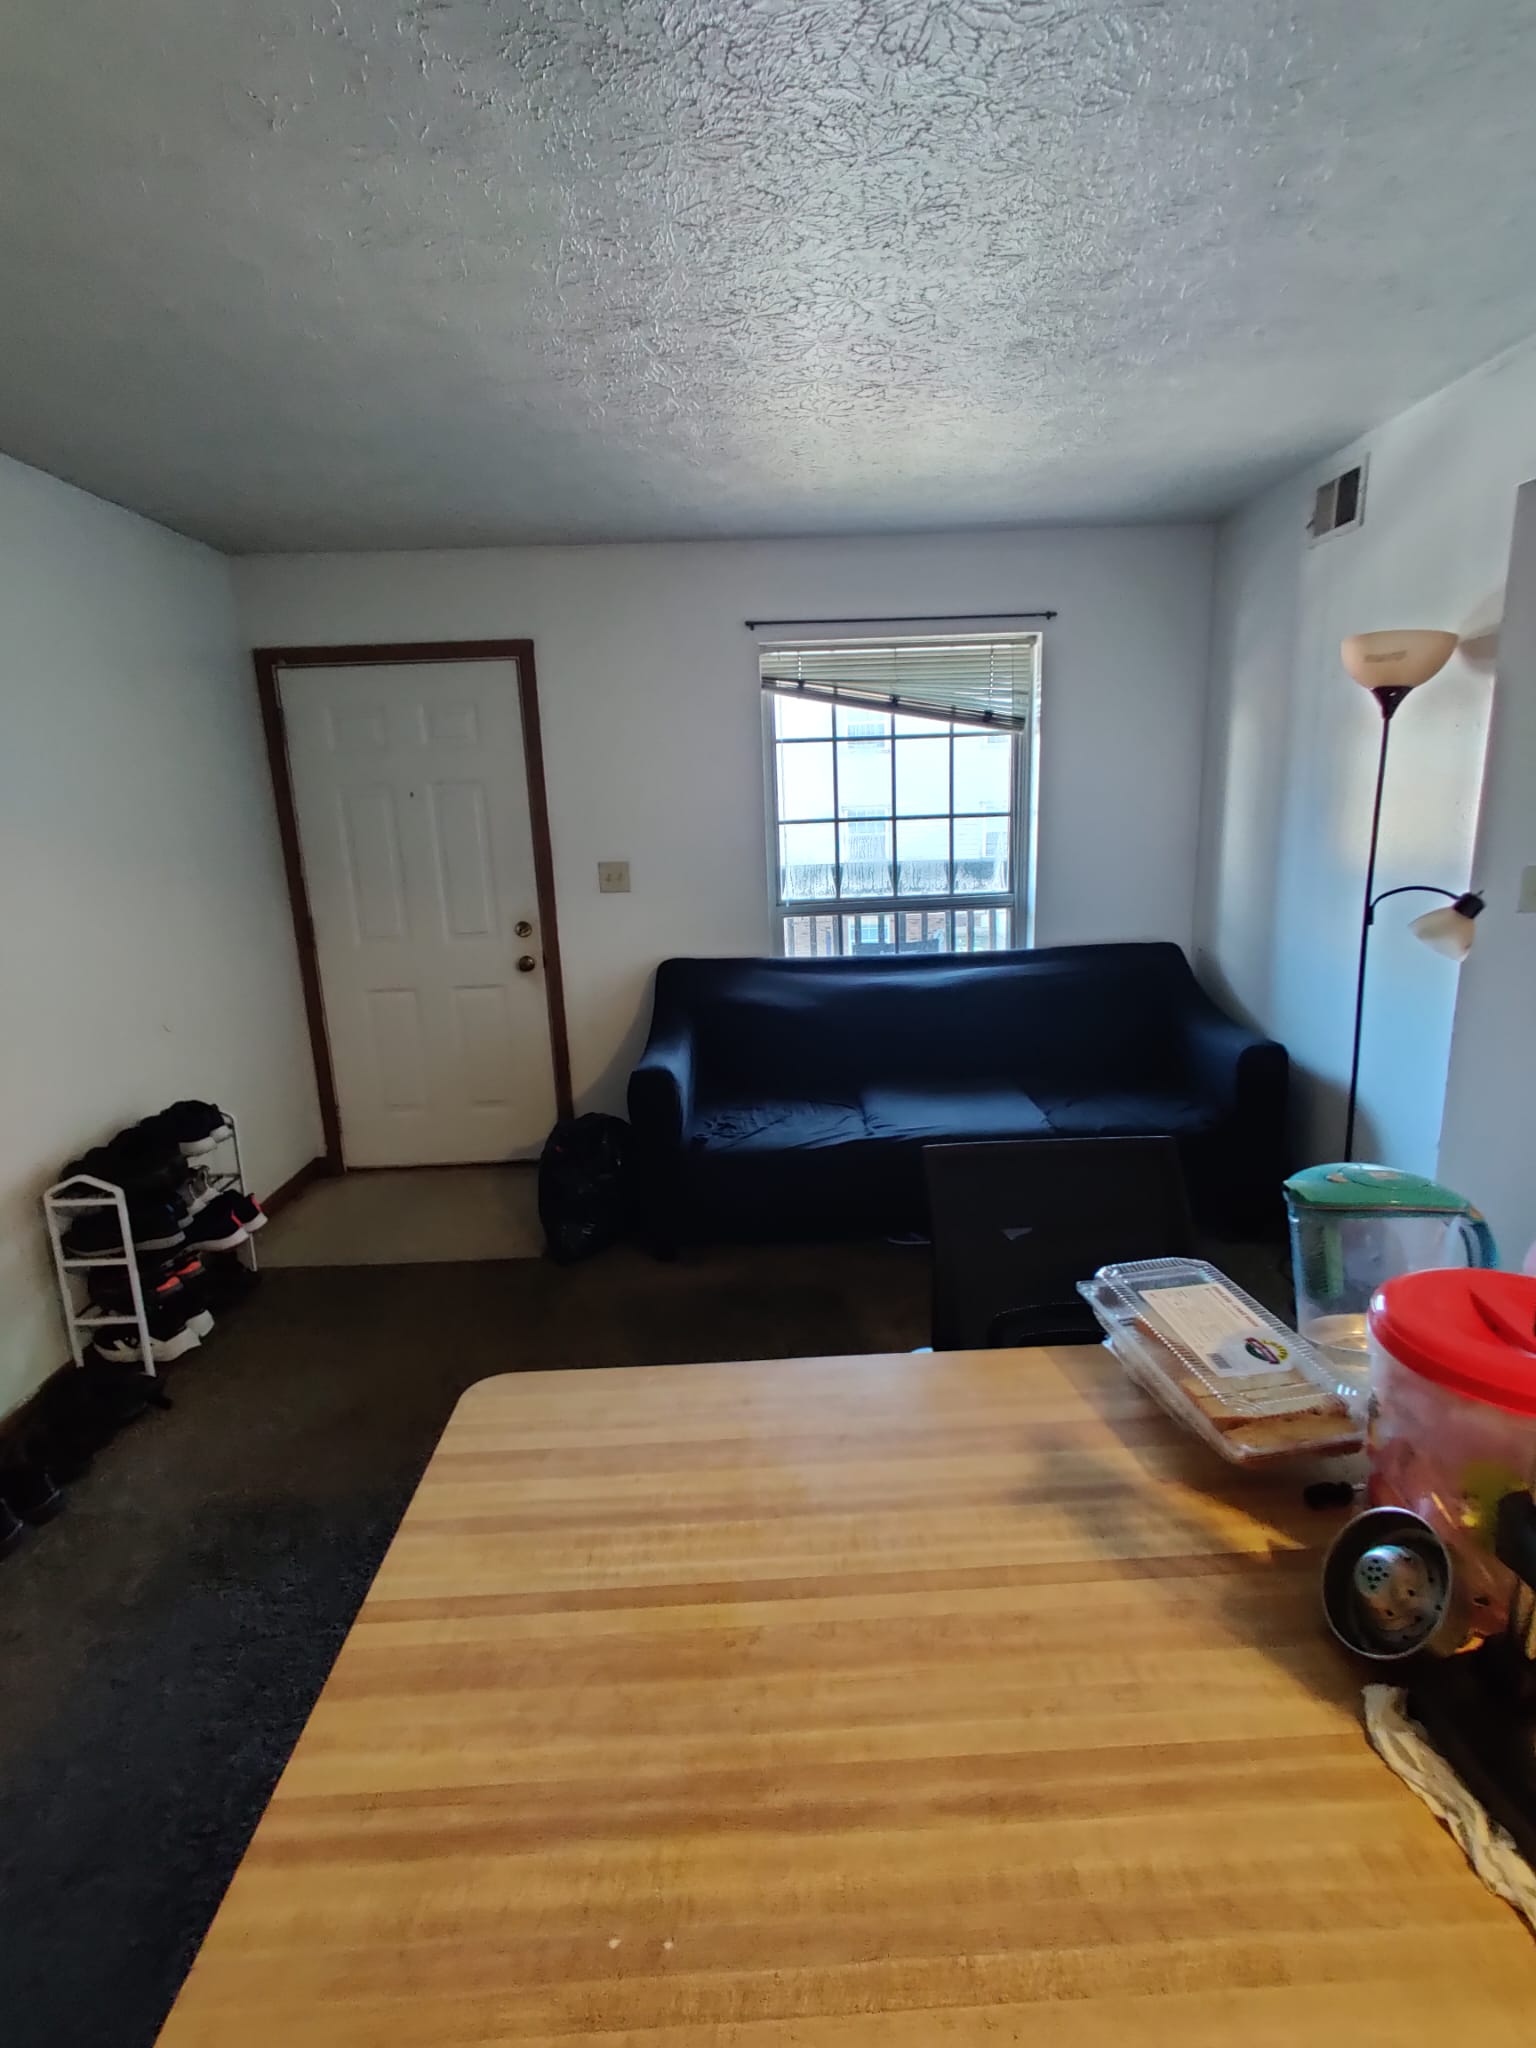 find-apartments/Granite-Student-Living/262-S-Chaucey-Ave,-Apt-19-West-Lafayette/2058